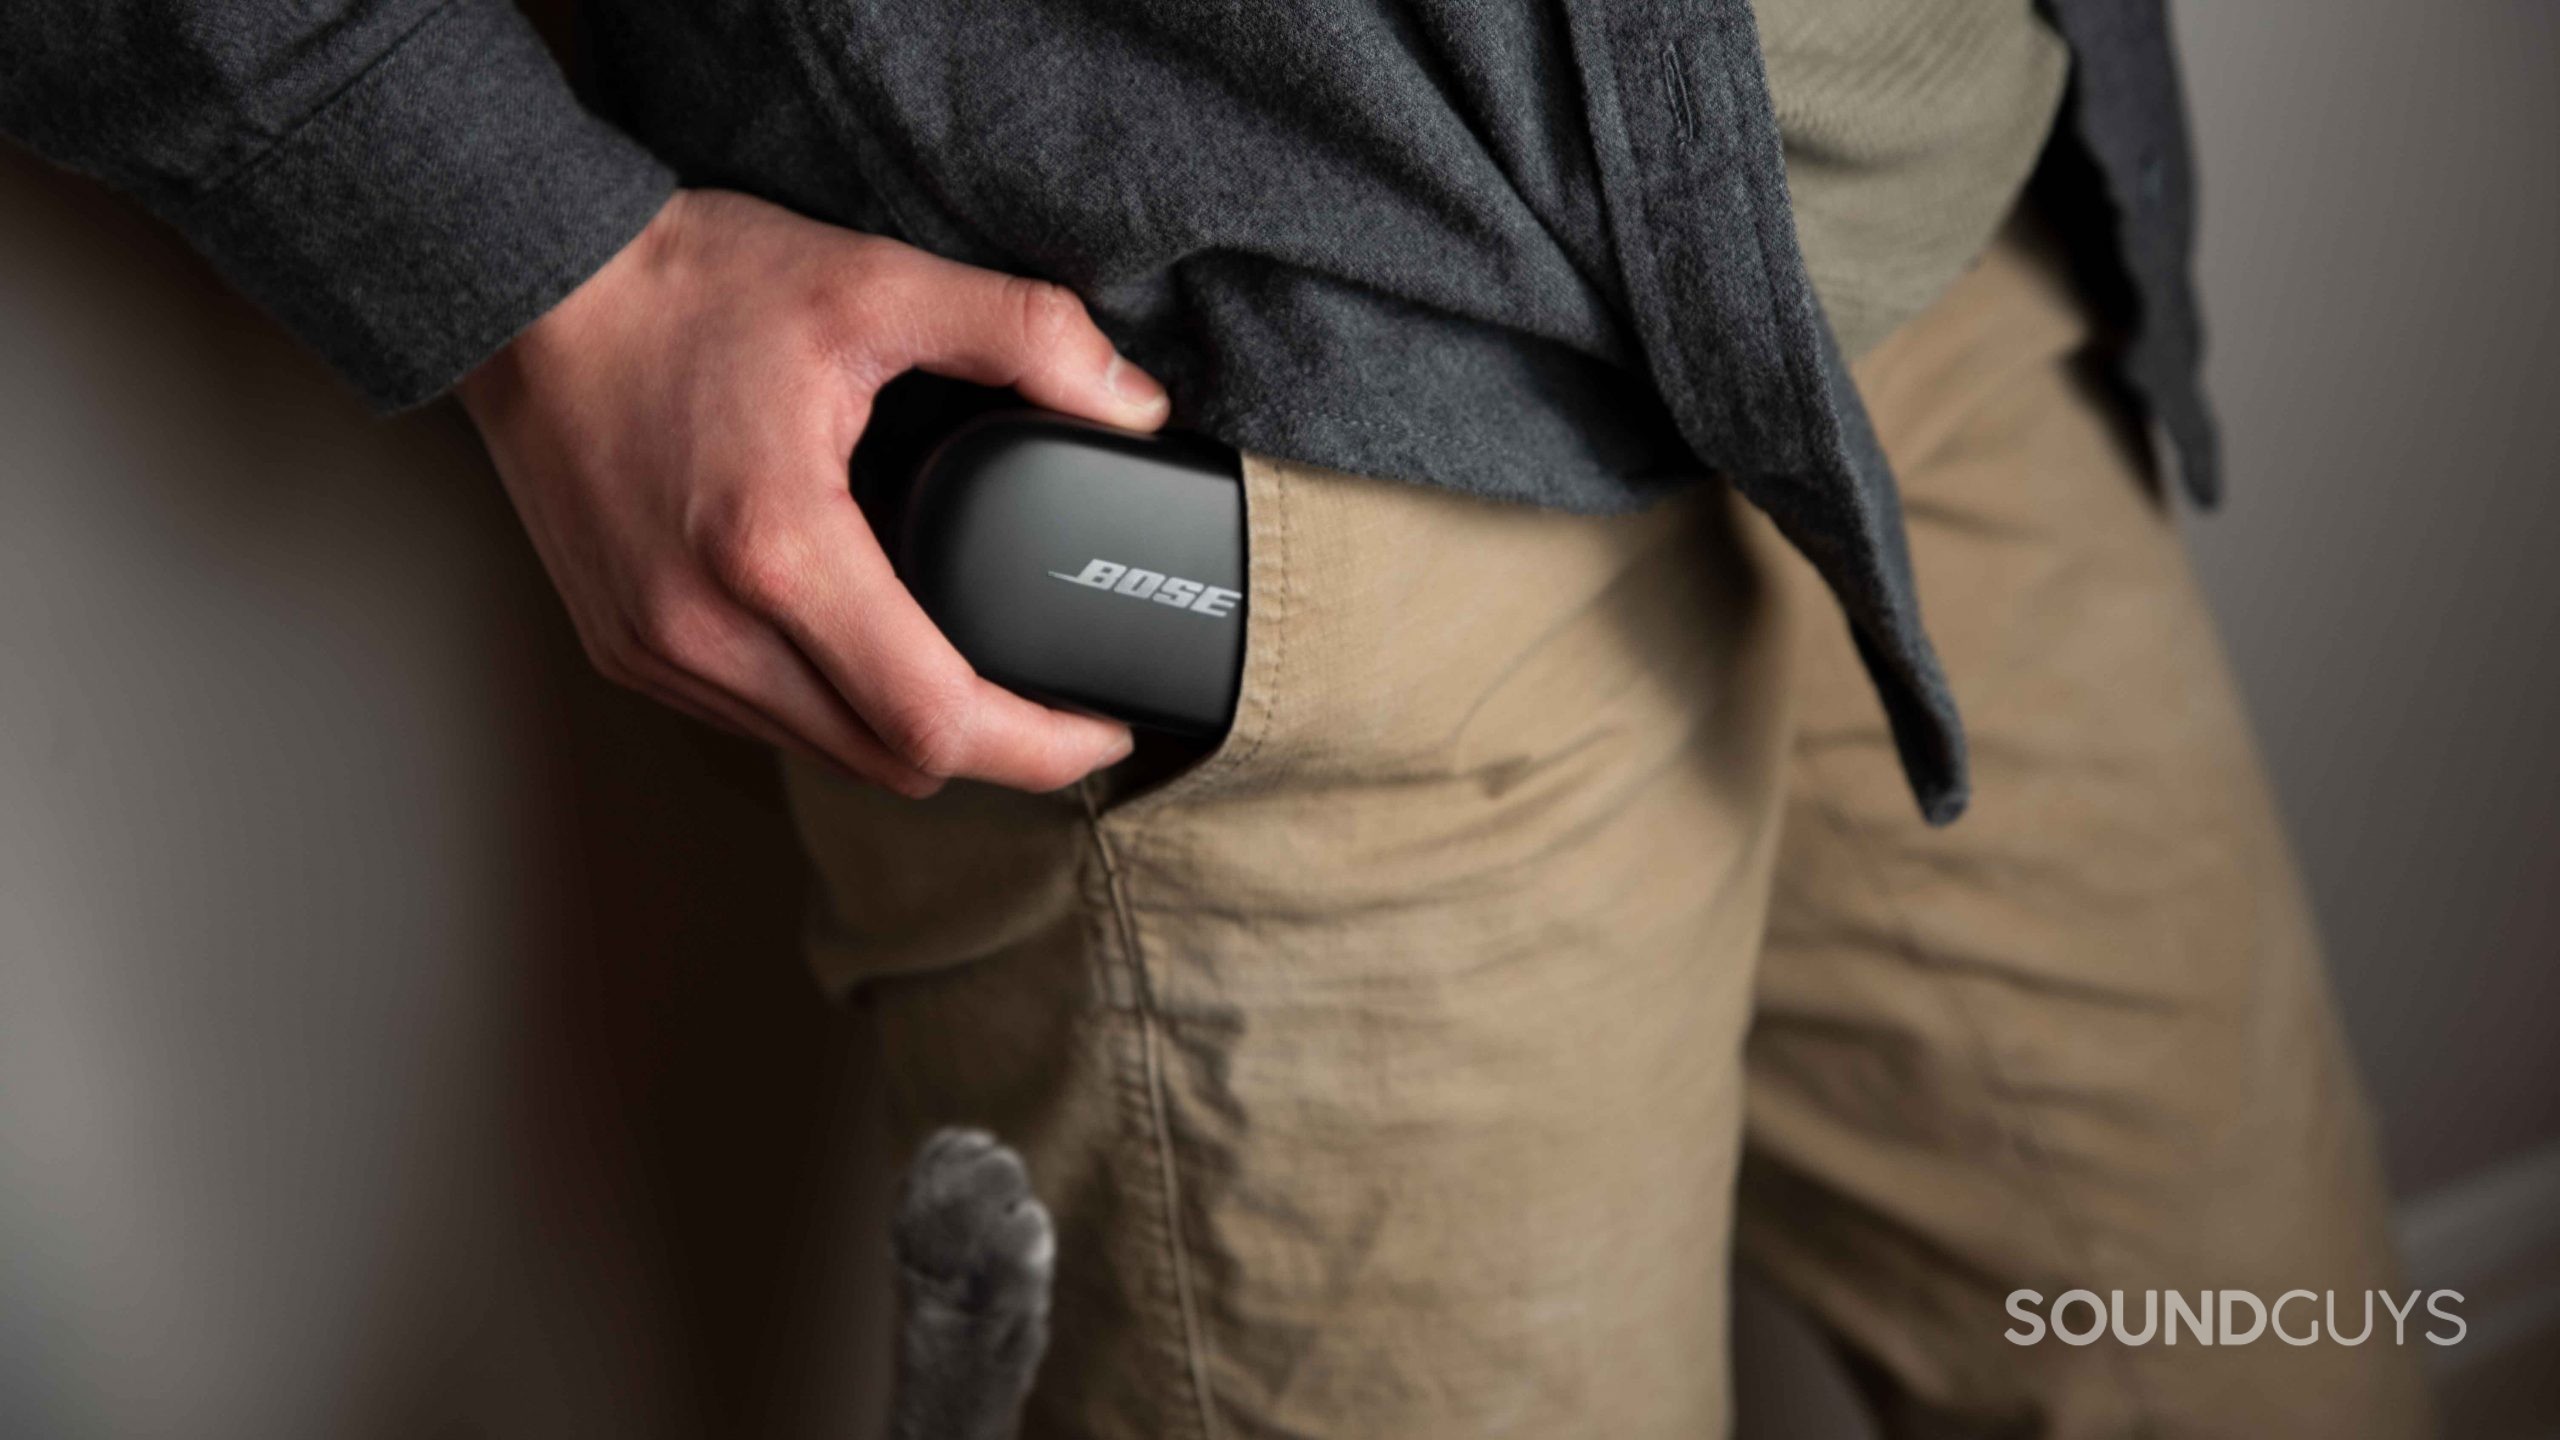 A cat paw reaches for the Bose QuietComfort Earbuds case as a woman inserts it into her pants pocket.